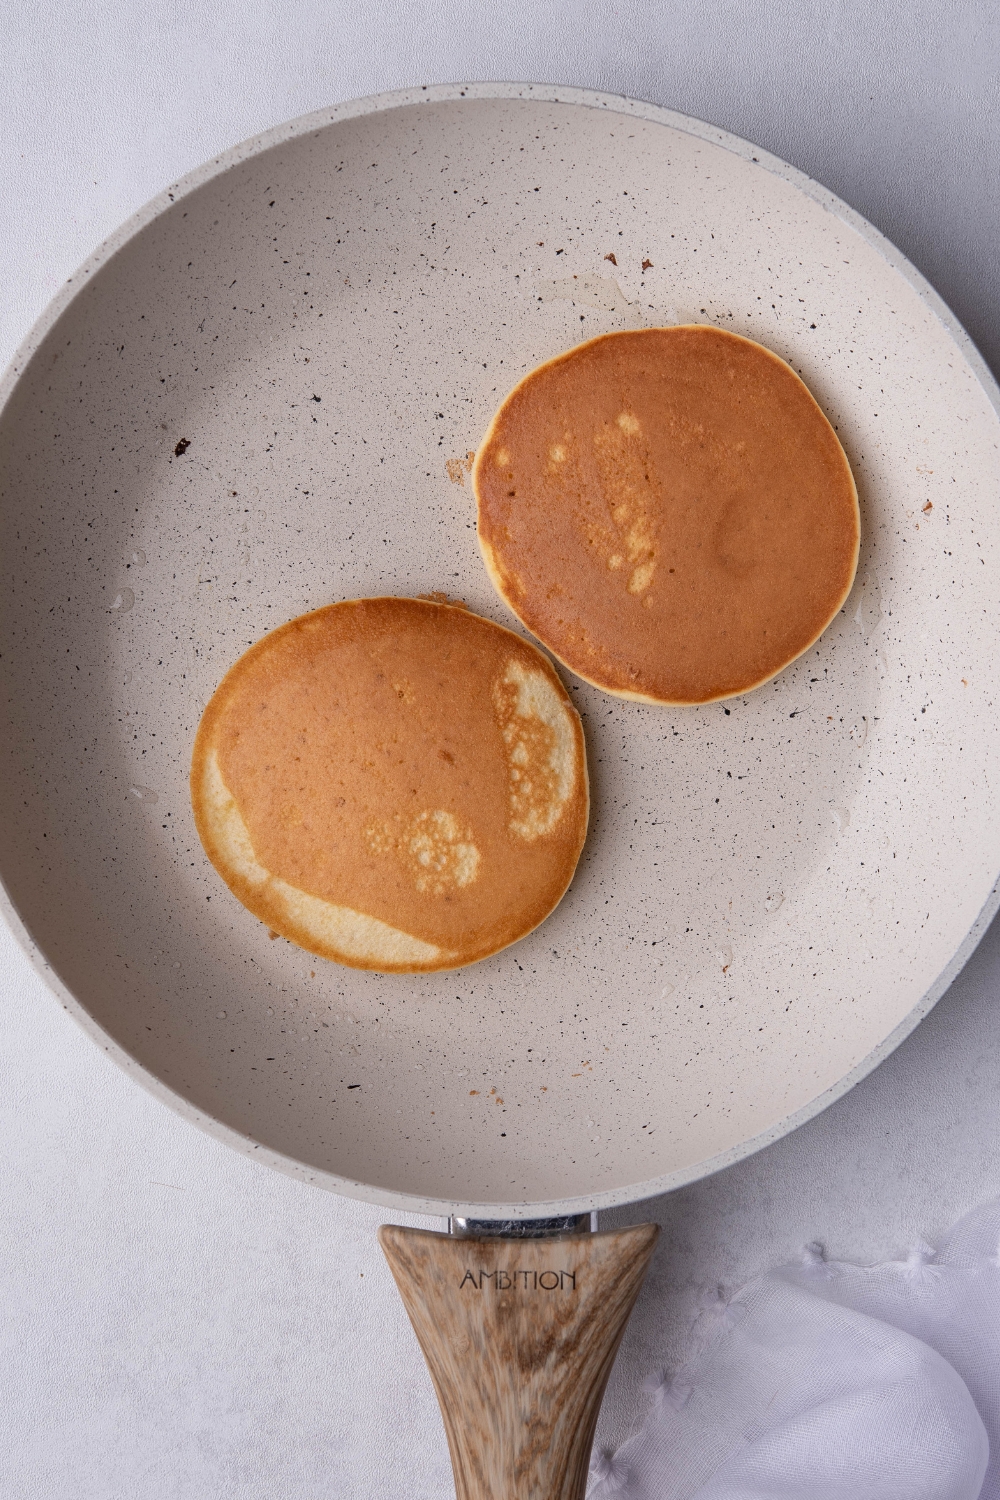 A skillet cooking two pancakes.